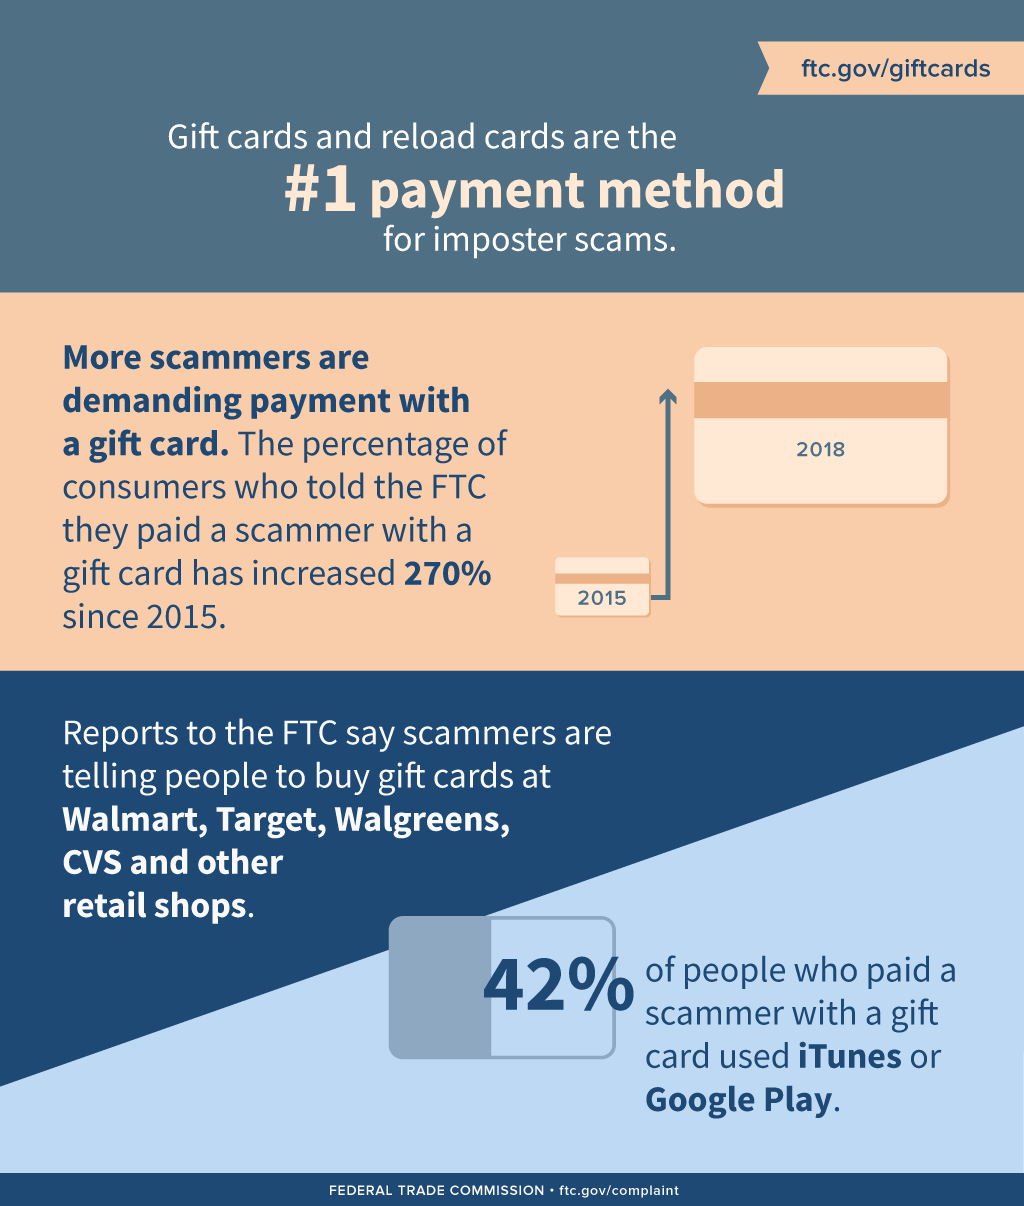 Gift cards and reload cards are the #1 payment method for imposter scams. More scammers are demanding payment with a gift card. The percentage of consumers who told the FTC they paid a scammer with a gift card has increased 270% since 2015. Reports to the FTC say scammers are telling people to buy gift cards at Walmart, Target, Walgreens, CVS and other retail shops. 42% of people who paid a scammer with a gift card used iTunes or Google Play. Federal Trade Commission. ftc.gov/complaint. ftc.gov/giftcards